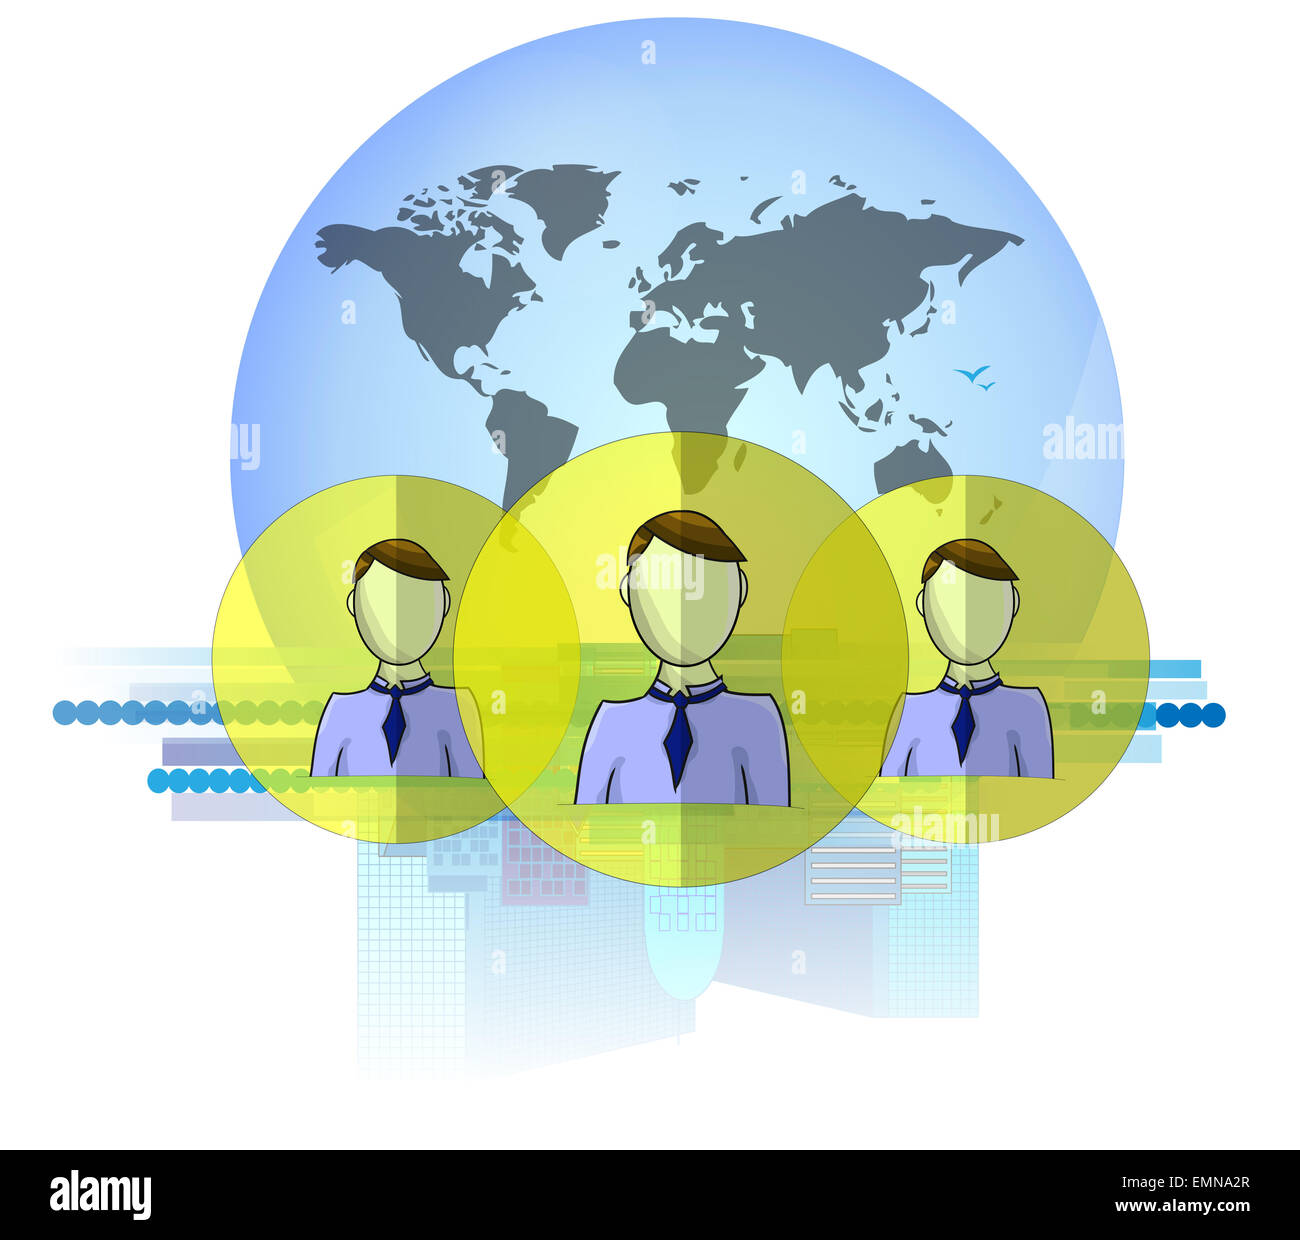 Illustration of social media heads with international business background isolated on white background Stock Photo